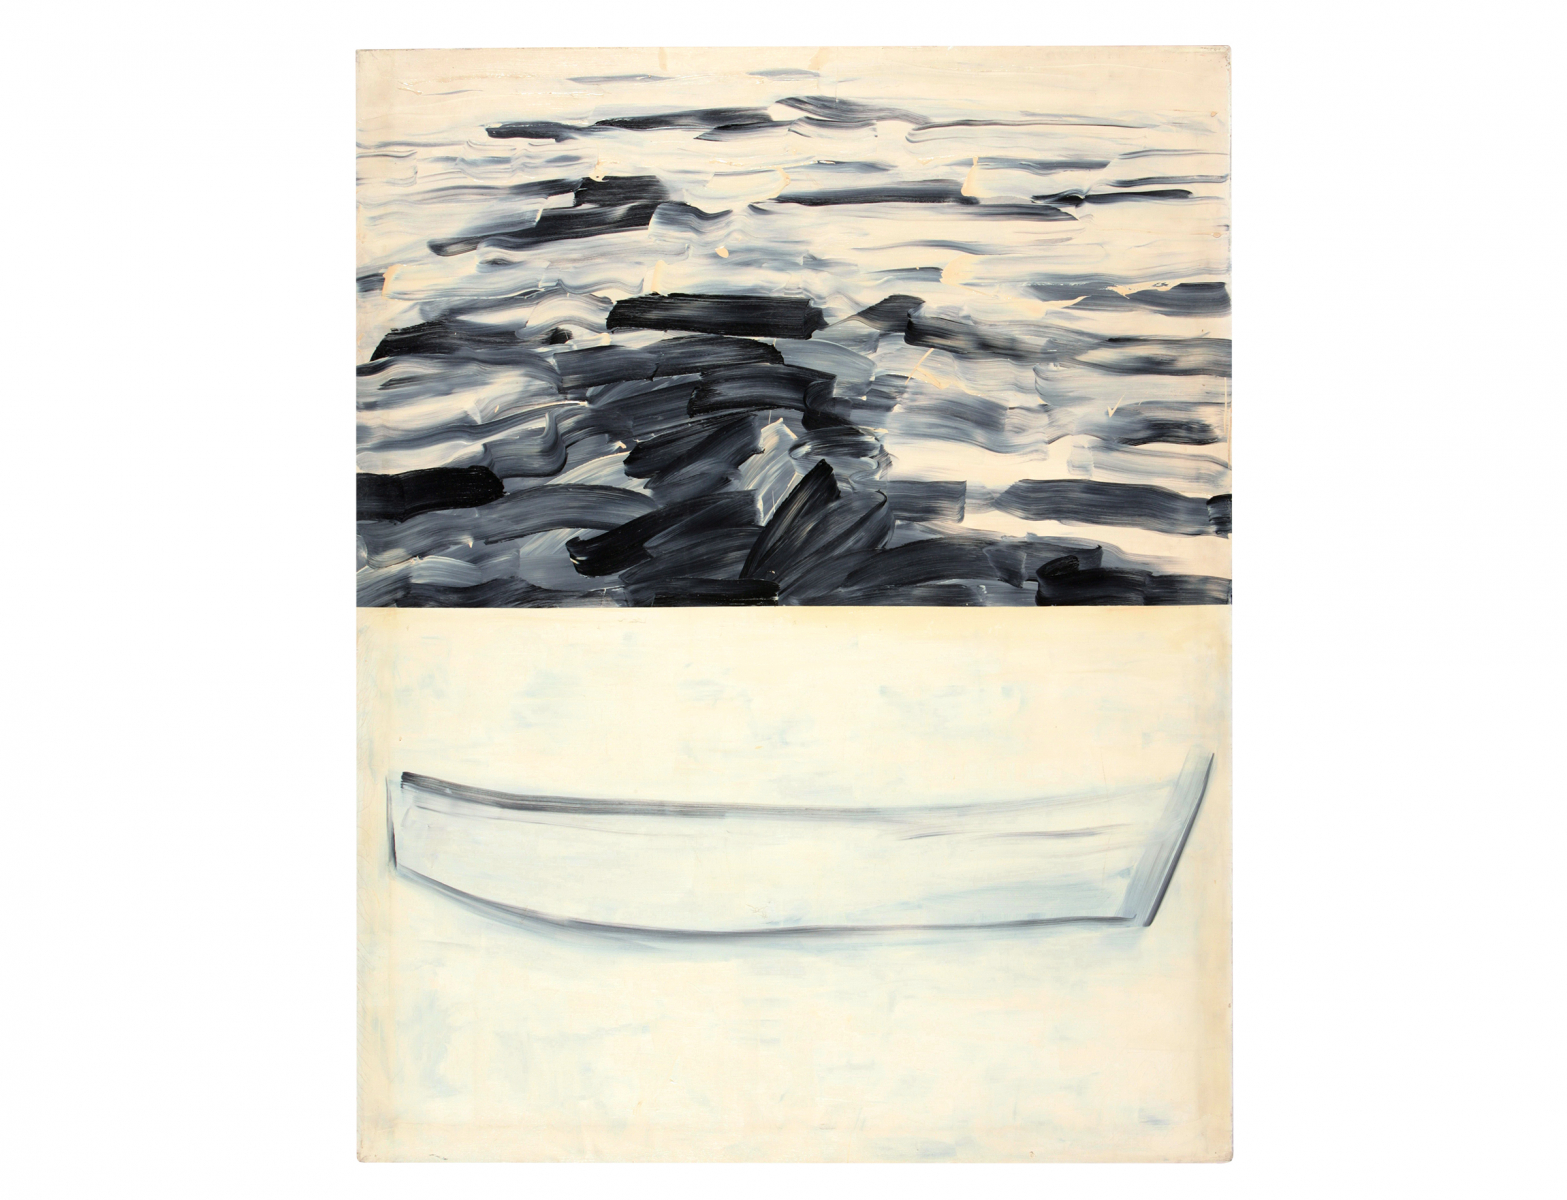 Untitled-88006(A), 1988, Oil on Canvas, 181.8x127.3cm